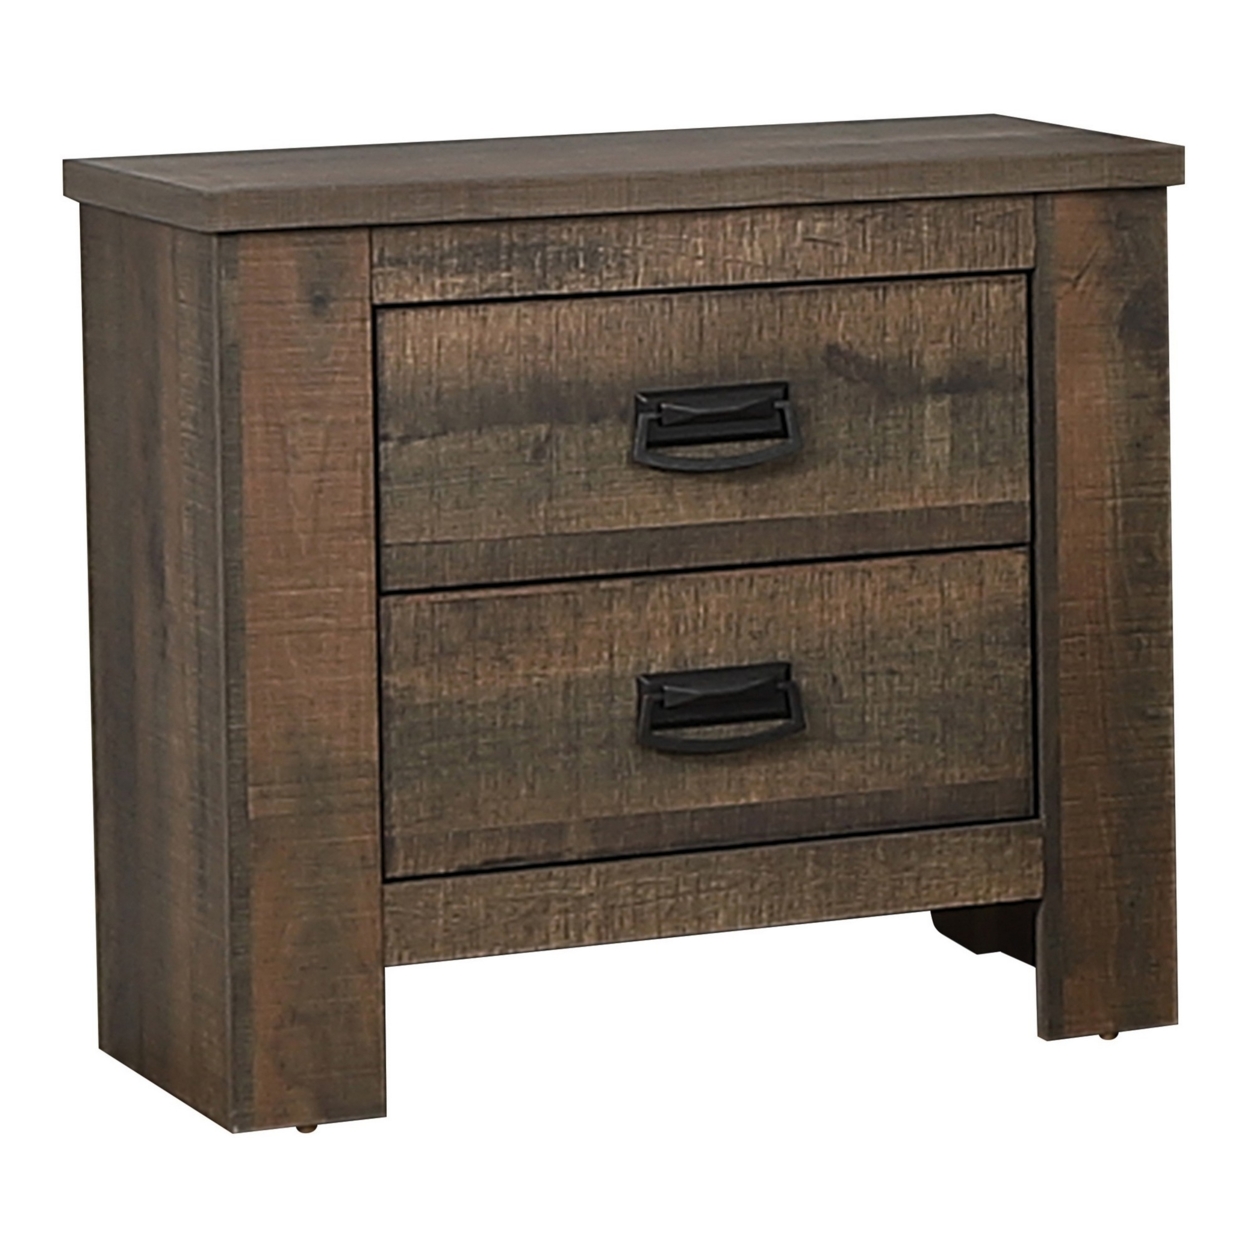 Wooden Nightstand With 2 Drawers And Saw Hewn Texture, Brown- Saltoro Sherpi